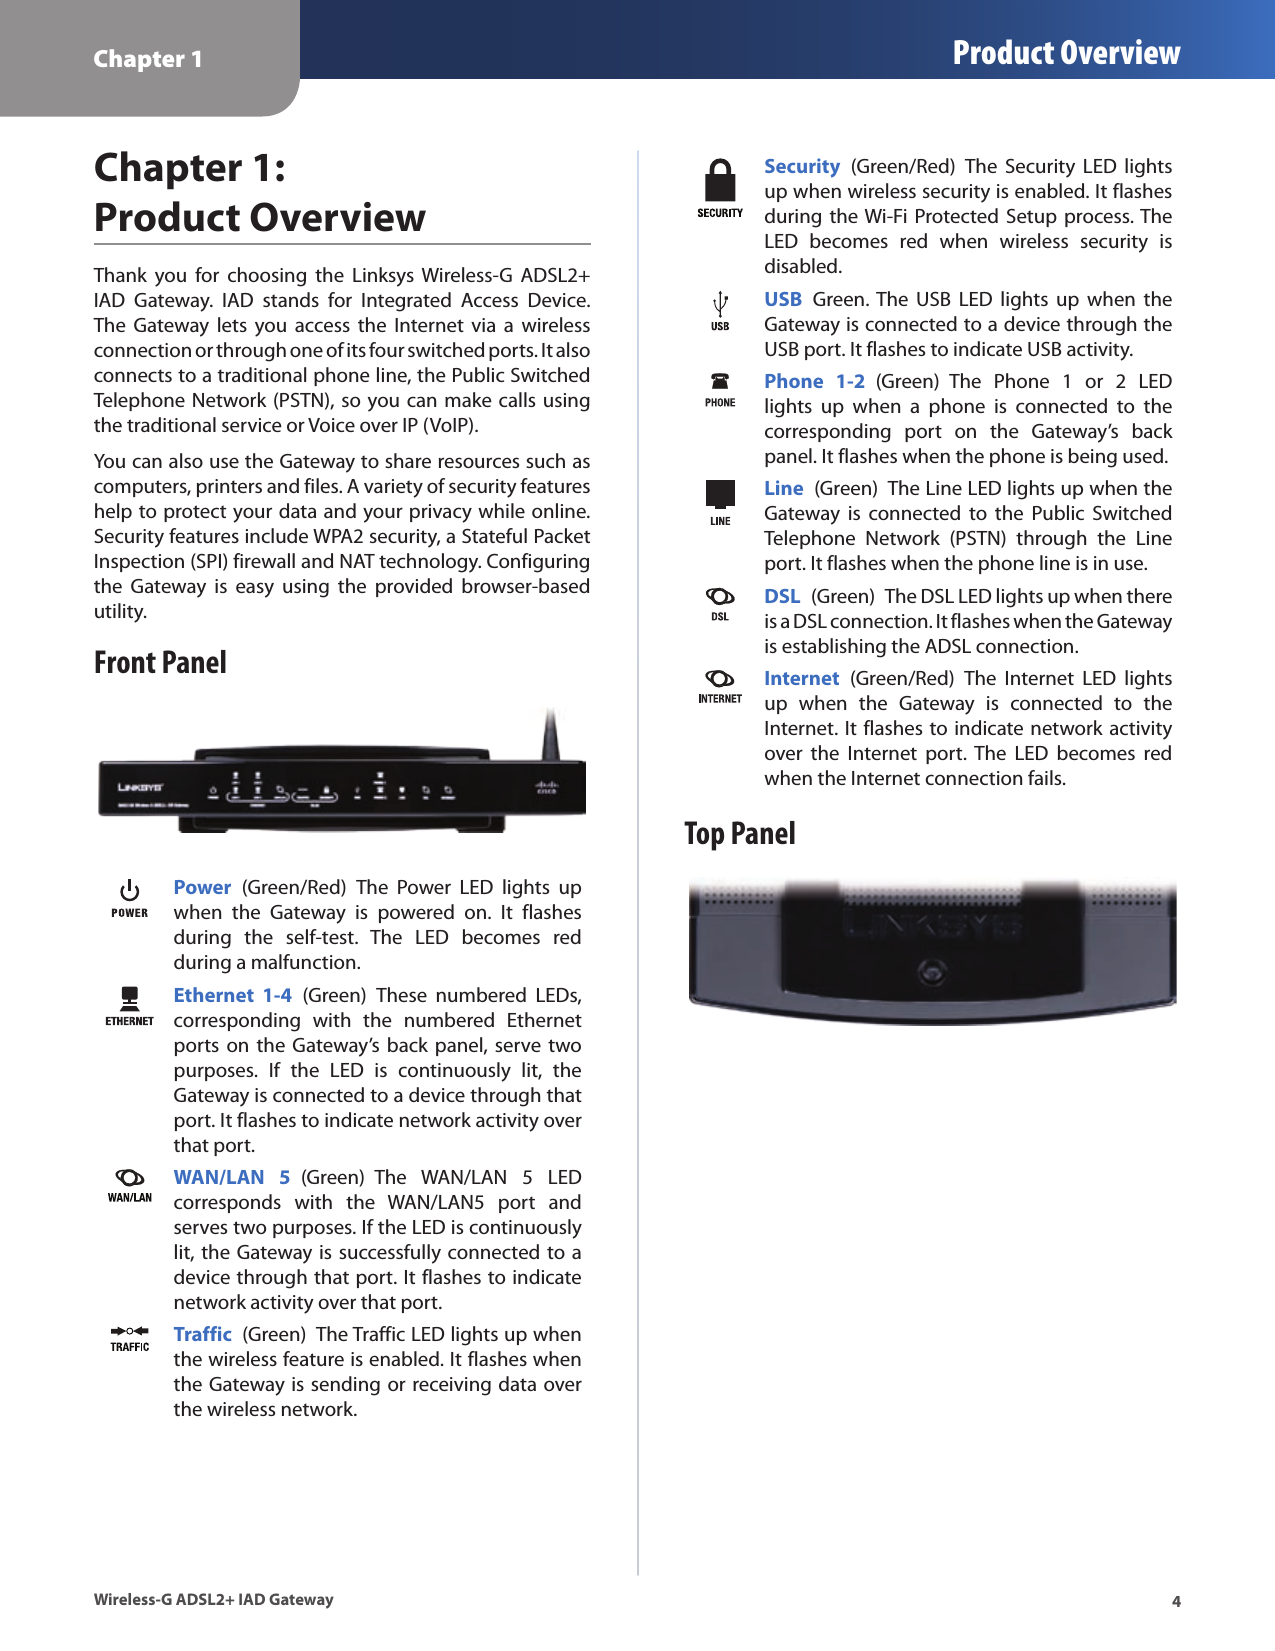 Chapter 1 Product Overview4Wireless-G ADSL2+ IAD GatewayChapter 1:  Product OverviewThank  you  for  choosing  the  Linksys  Wireless-G  ADSL2+ IAD  Gateway.  IAD  stands  for  Integrated  Access  Device.The  Gateway  lets  you  access  the  Internet  via  a  wireless connection or through one of its four switched ports. It also connects to a traditional phone line, the Public Switched Telephone Network (PSTN), so you can make calls using the traditional service or Voice over IP (VoIP). You can also use the Gateway to share resources such as computers, printers and files. A variety of security features help to protect your data and your privacy while online. Security features include WPA2 security, a Stateful Packet Inspection (SPI) firewall and NAT technology. Configuring the  Gateway  is  easy  using  the  provided  browser-based utility.Front PanelPower  (Green/Red)  The  Power  LED  lights  up when  the  Gateway  is  powered  on.  It  flashes during  the  self-test.  The  LED  becomes  red during a malfunction.Ethernet  1-4  (Green)  These  numbered  LEDs, corresponding  with  the  numbered  Ethernet ports  on  the  Gateway’s back panel, serve two purposes.  If  the  LED  is  continuously  lit,  the Gateway is connected to a device through that port. It flashes to indicate network activity over that port.WAN/LAN  5  (Green)  The  WAN/LAN  5  LED corresponds  with  the  WAN/LAN5  port  and serves two purposes. If the LED is continuously lit, the Gateway is successfully connected to a device through that port. It flashes to indicate network activity over that port.Traffic  (Green)  The Traffic LED lights up when the wireless feature is enabled. It flashes when the Gateway is sending or receiving data over the wireless network.Security  (Green/Red)  The  Security  LED  lights up when wireless security is enabled. It flashes during the Wi-Fi Protected Setup process. The LED  becomes  red  when  wireless  security  is disabled.USB  Green. The  USB  LED  lights  up  when  the Gateway is connected to a device through the USB port. It flashes to indicate USB activity.Phone  1-2  (Green)  The  Phone  1  or  2  LED lights  up  when  a  phone  is  connected  to  the corresponding  port  on  the  Gateway’s  back panel. It flashes when the phone is being used.Line  (Green)  The Line LED lights up when the Gateway  is  connected  to  the  Public  Switched Telephone  Network  (PSTN)  through  the  Line port. It flashes when the phone line is in use.DSL  (Green)  The DSL LED lights up when there is a DSL connection. It flashes when the Gateway is establishing the ADSL connection.Internet  (Green/Red)  The  Internet  LED  lights up  when  the  Gateway  is  connected  to  the Internet. It flashes to indicate network activity over  the  Internet  port.  The  LED  becomes  red when the Internet connection fails.Top Panel